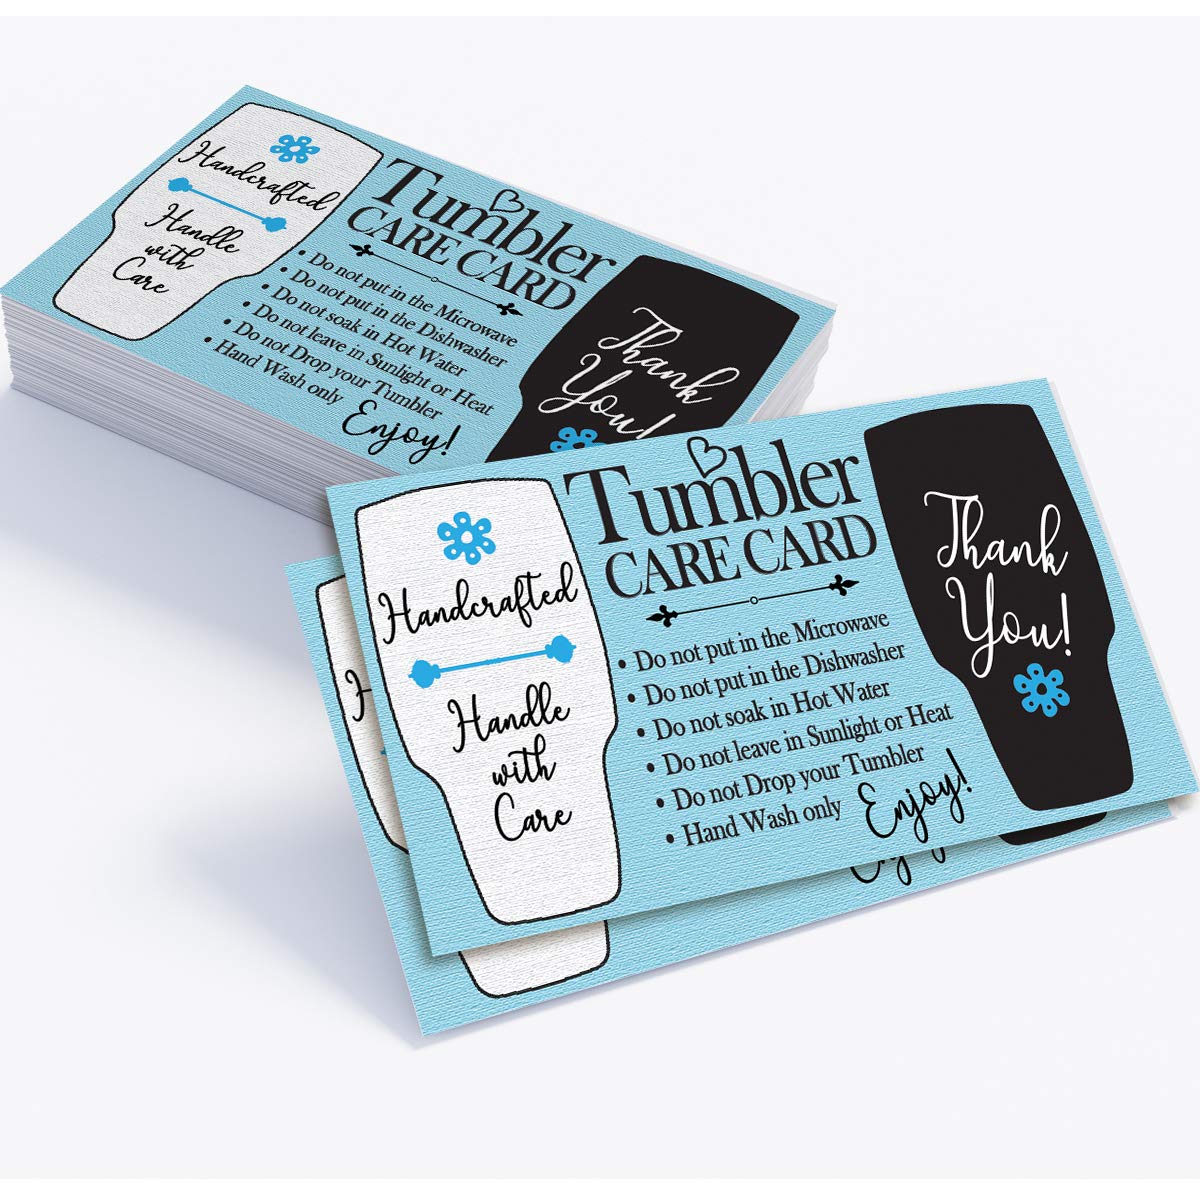 tumbler business cards 1